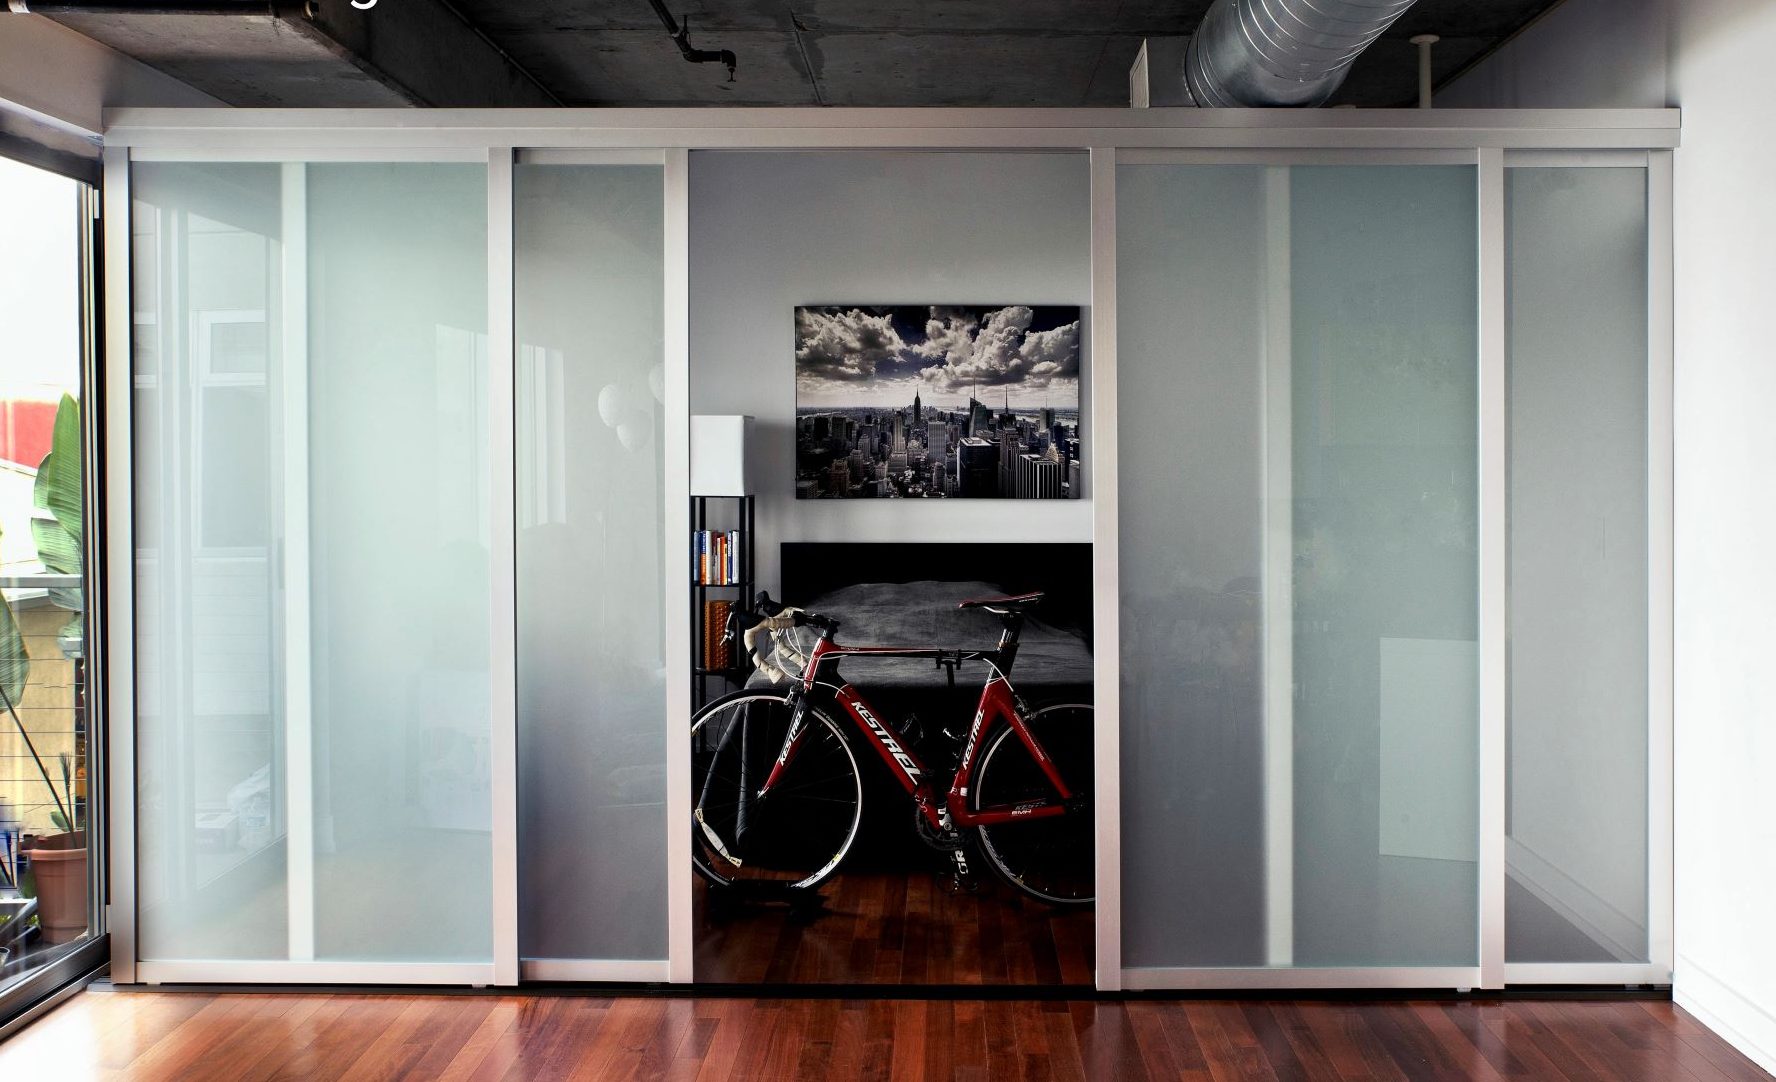 Modern room with frosted interior glass doors revealing a bicycle and framed cityscape photograph.